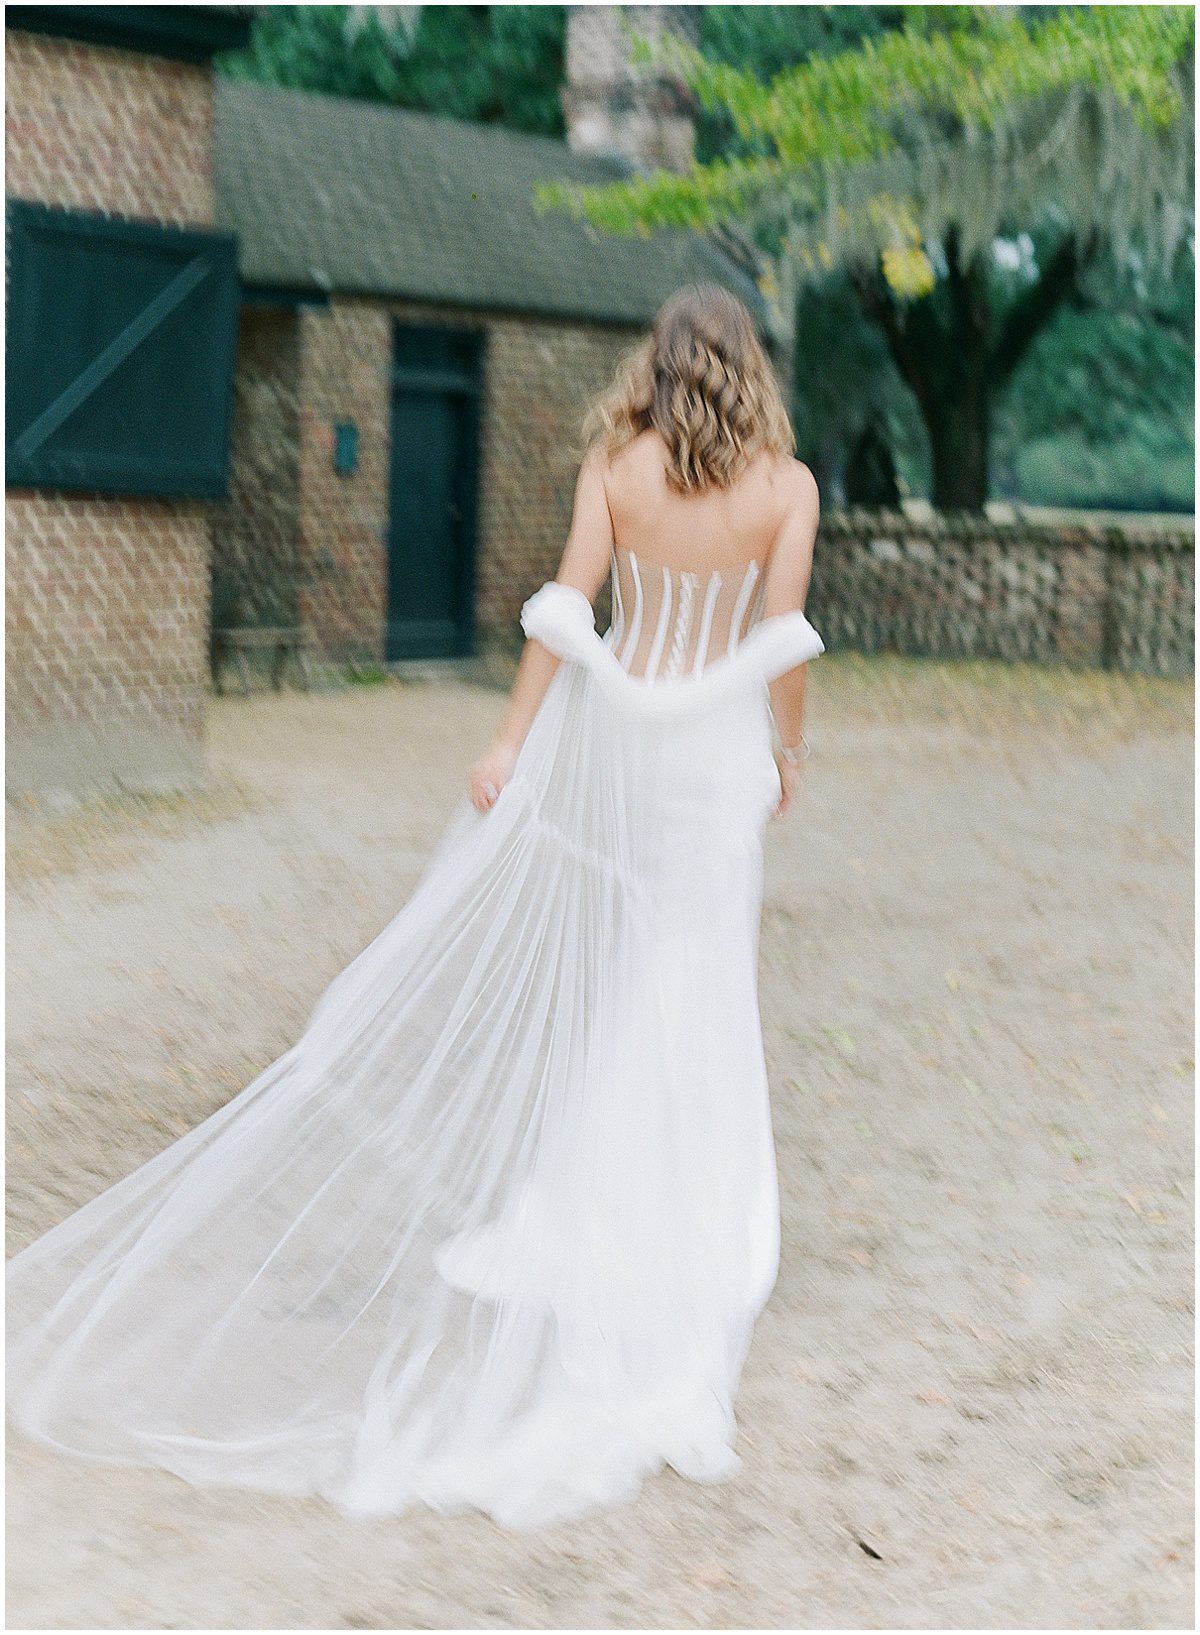 Motion Blur of Bride Walking away from Camera Photo